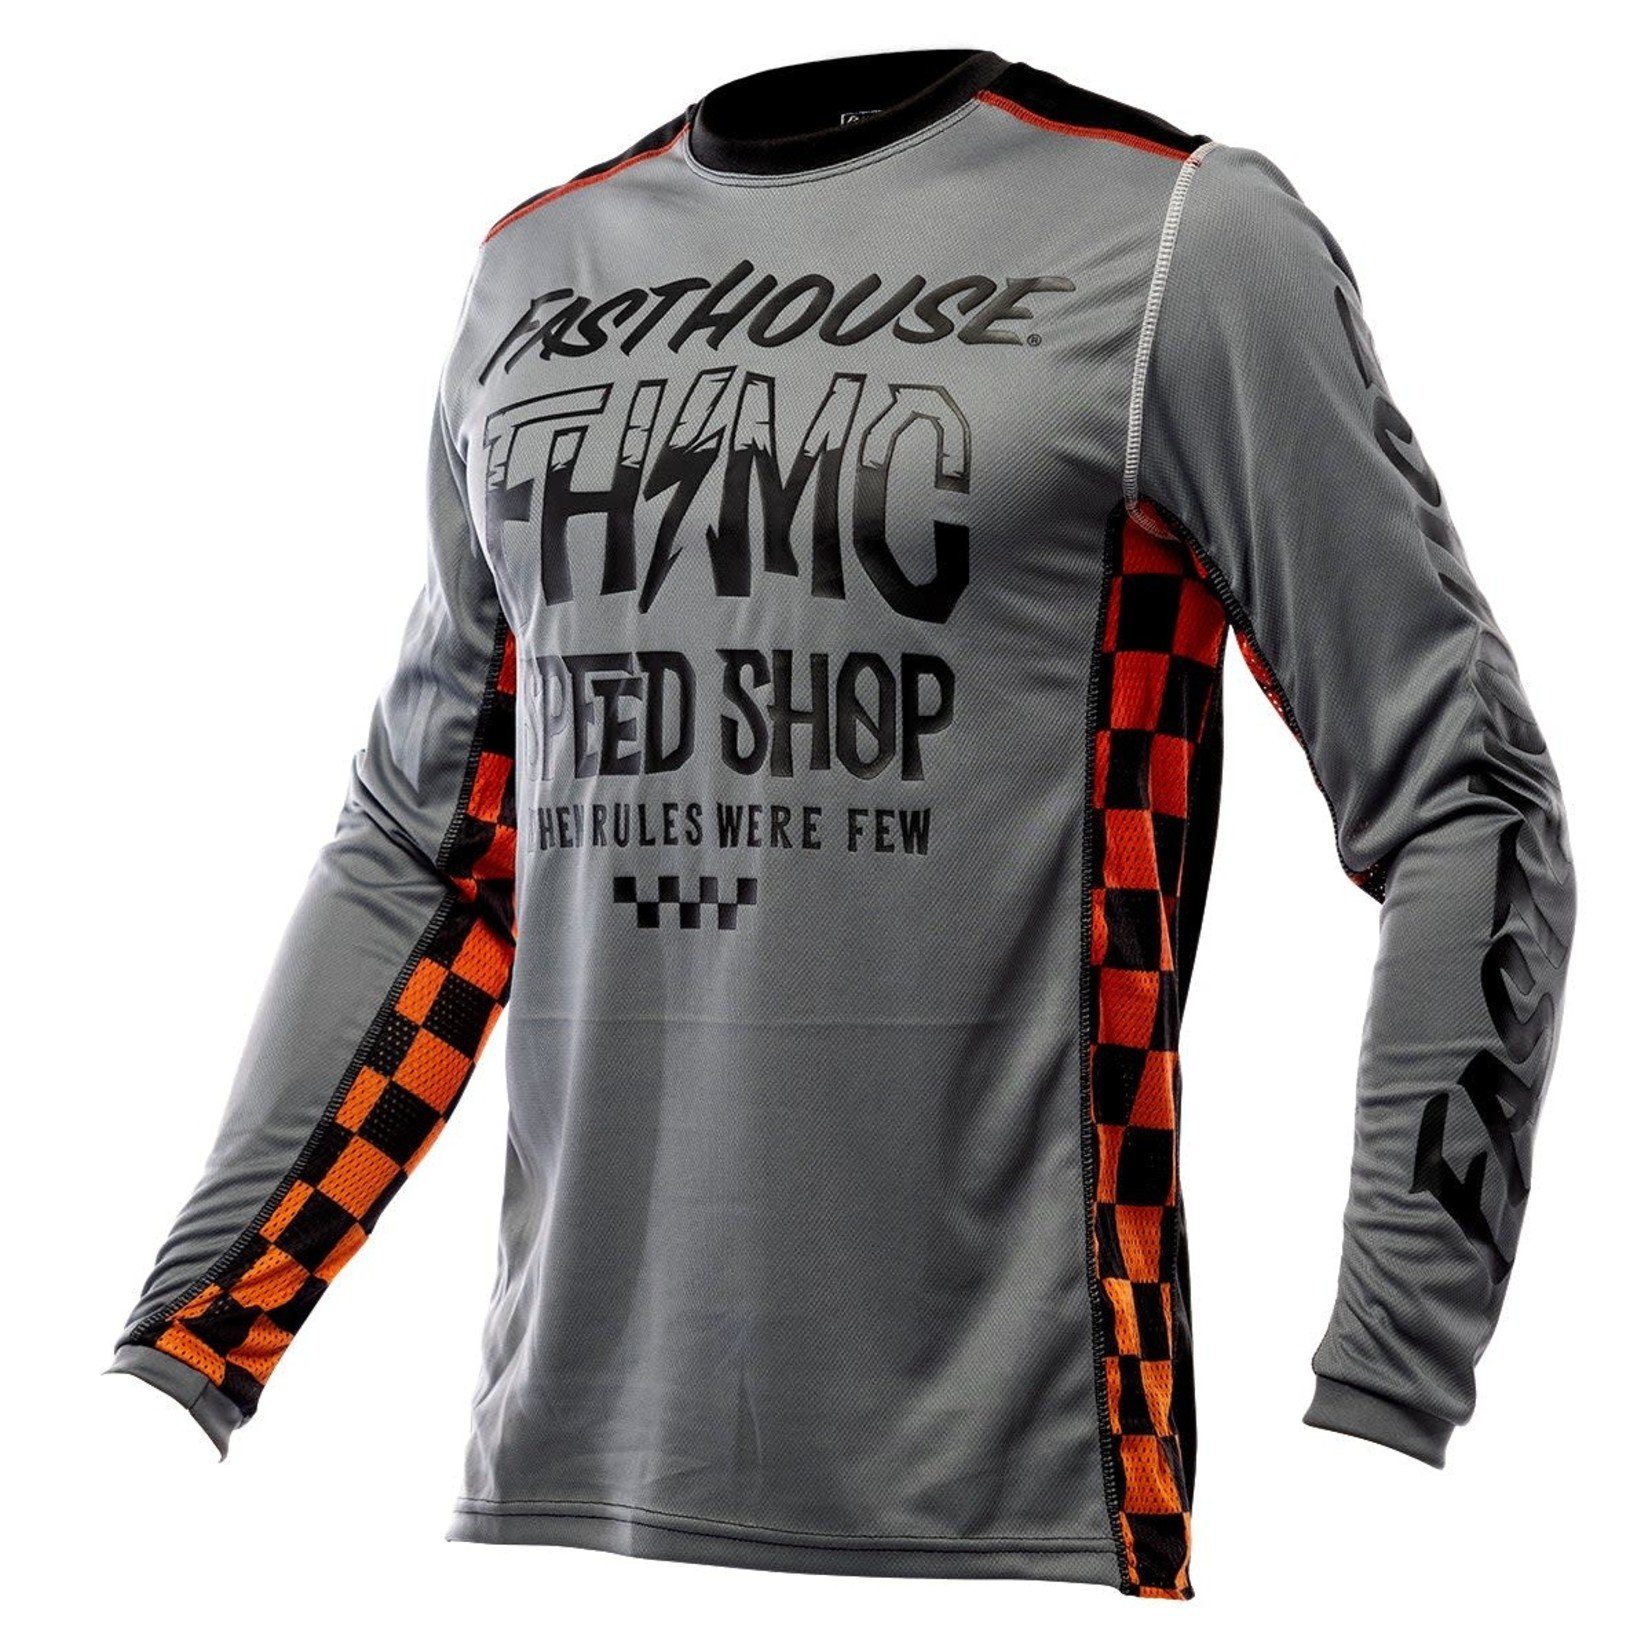 FASTHOUSE Grindhouse Brute Jersey